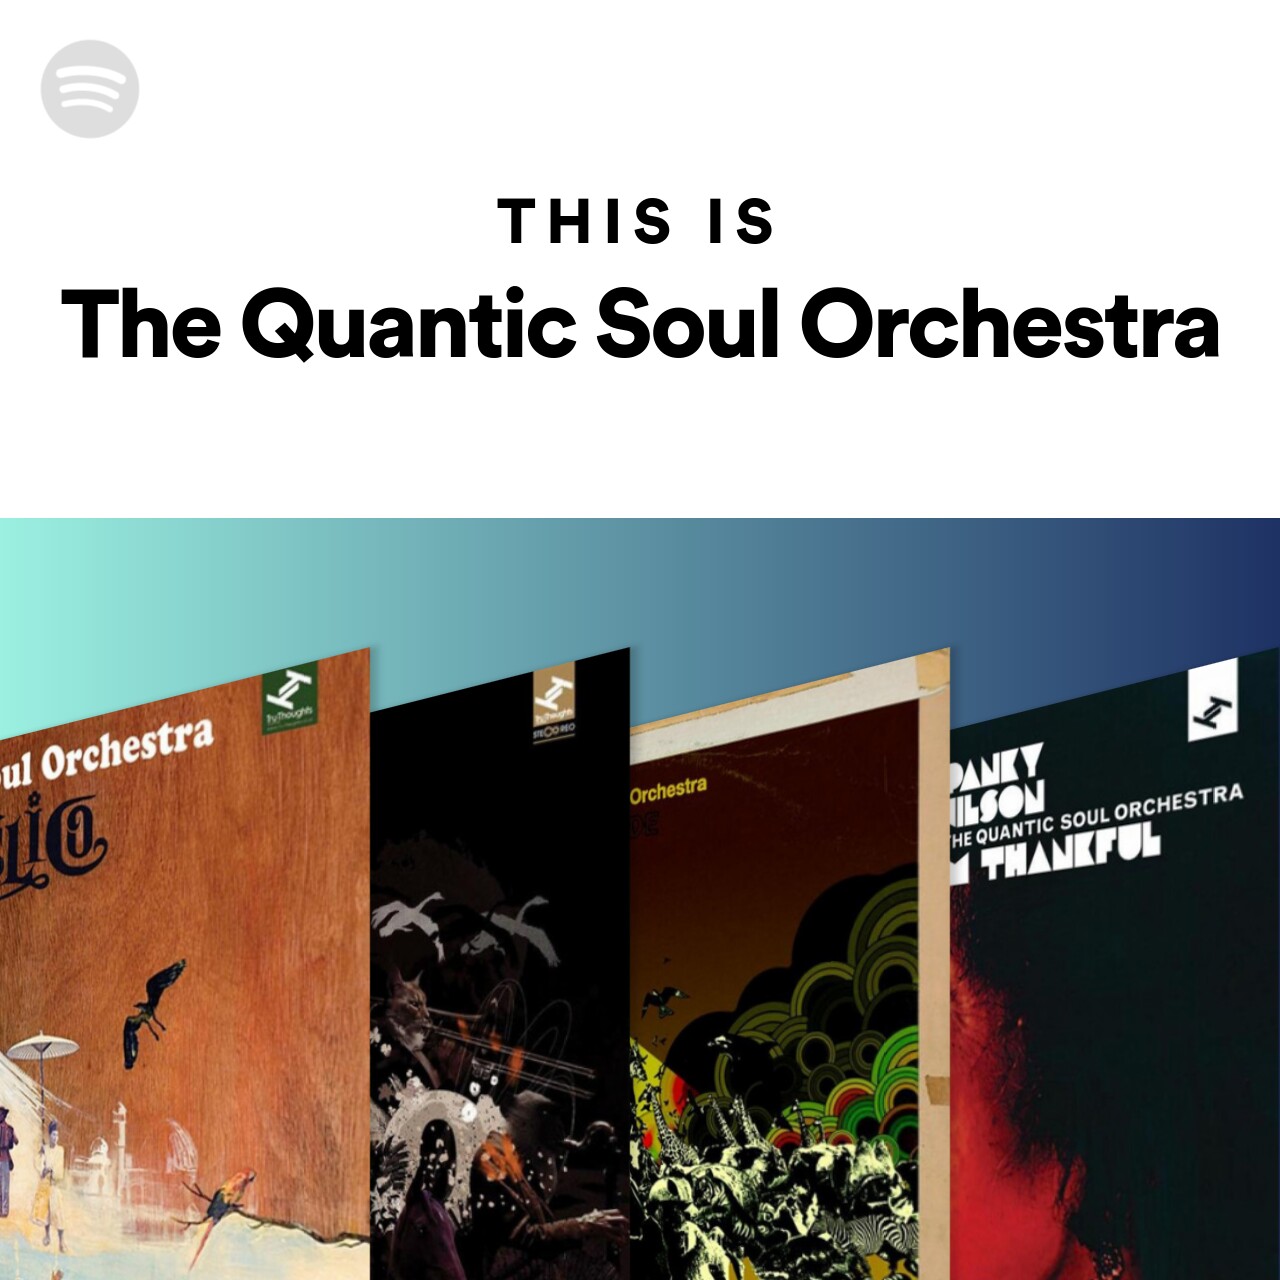 This Is The Quantic Soul Orchestra